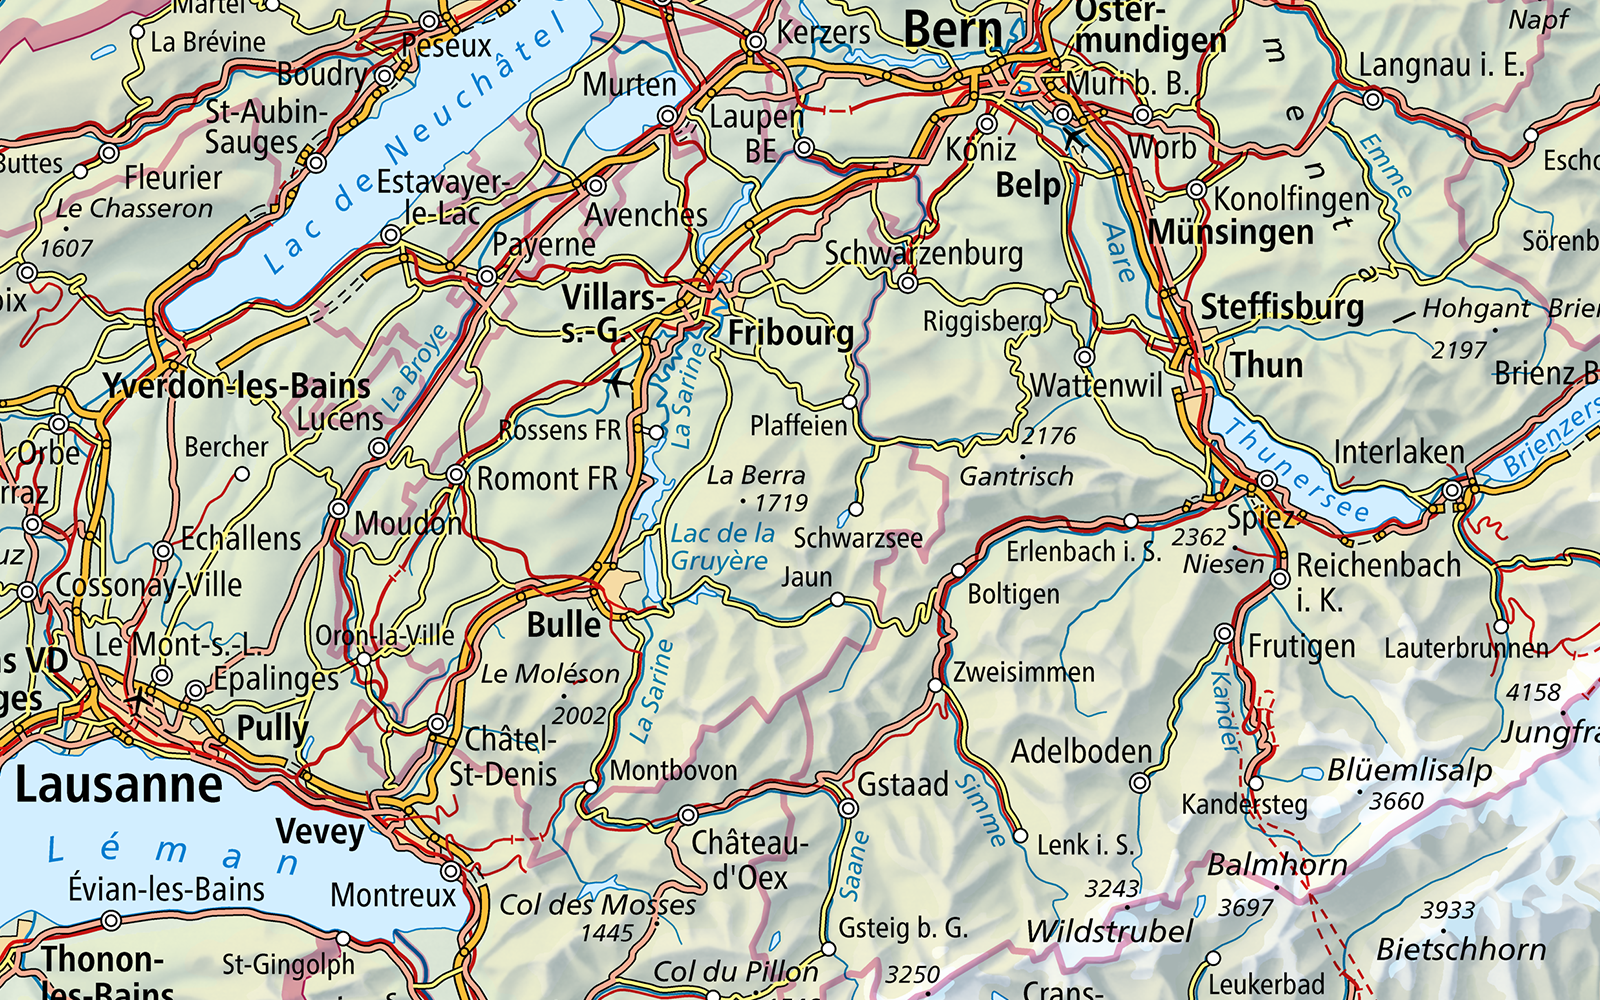 The picture shows a section of the Swiss Map Raster 1000 of the Lausanne - Bern - Interlaken area.